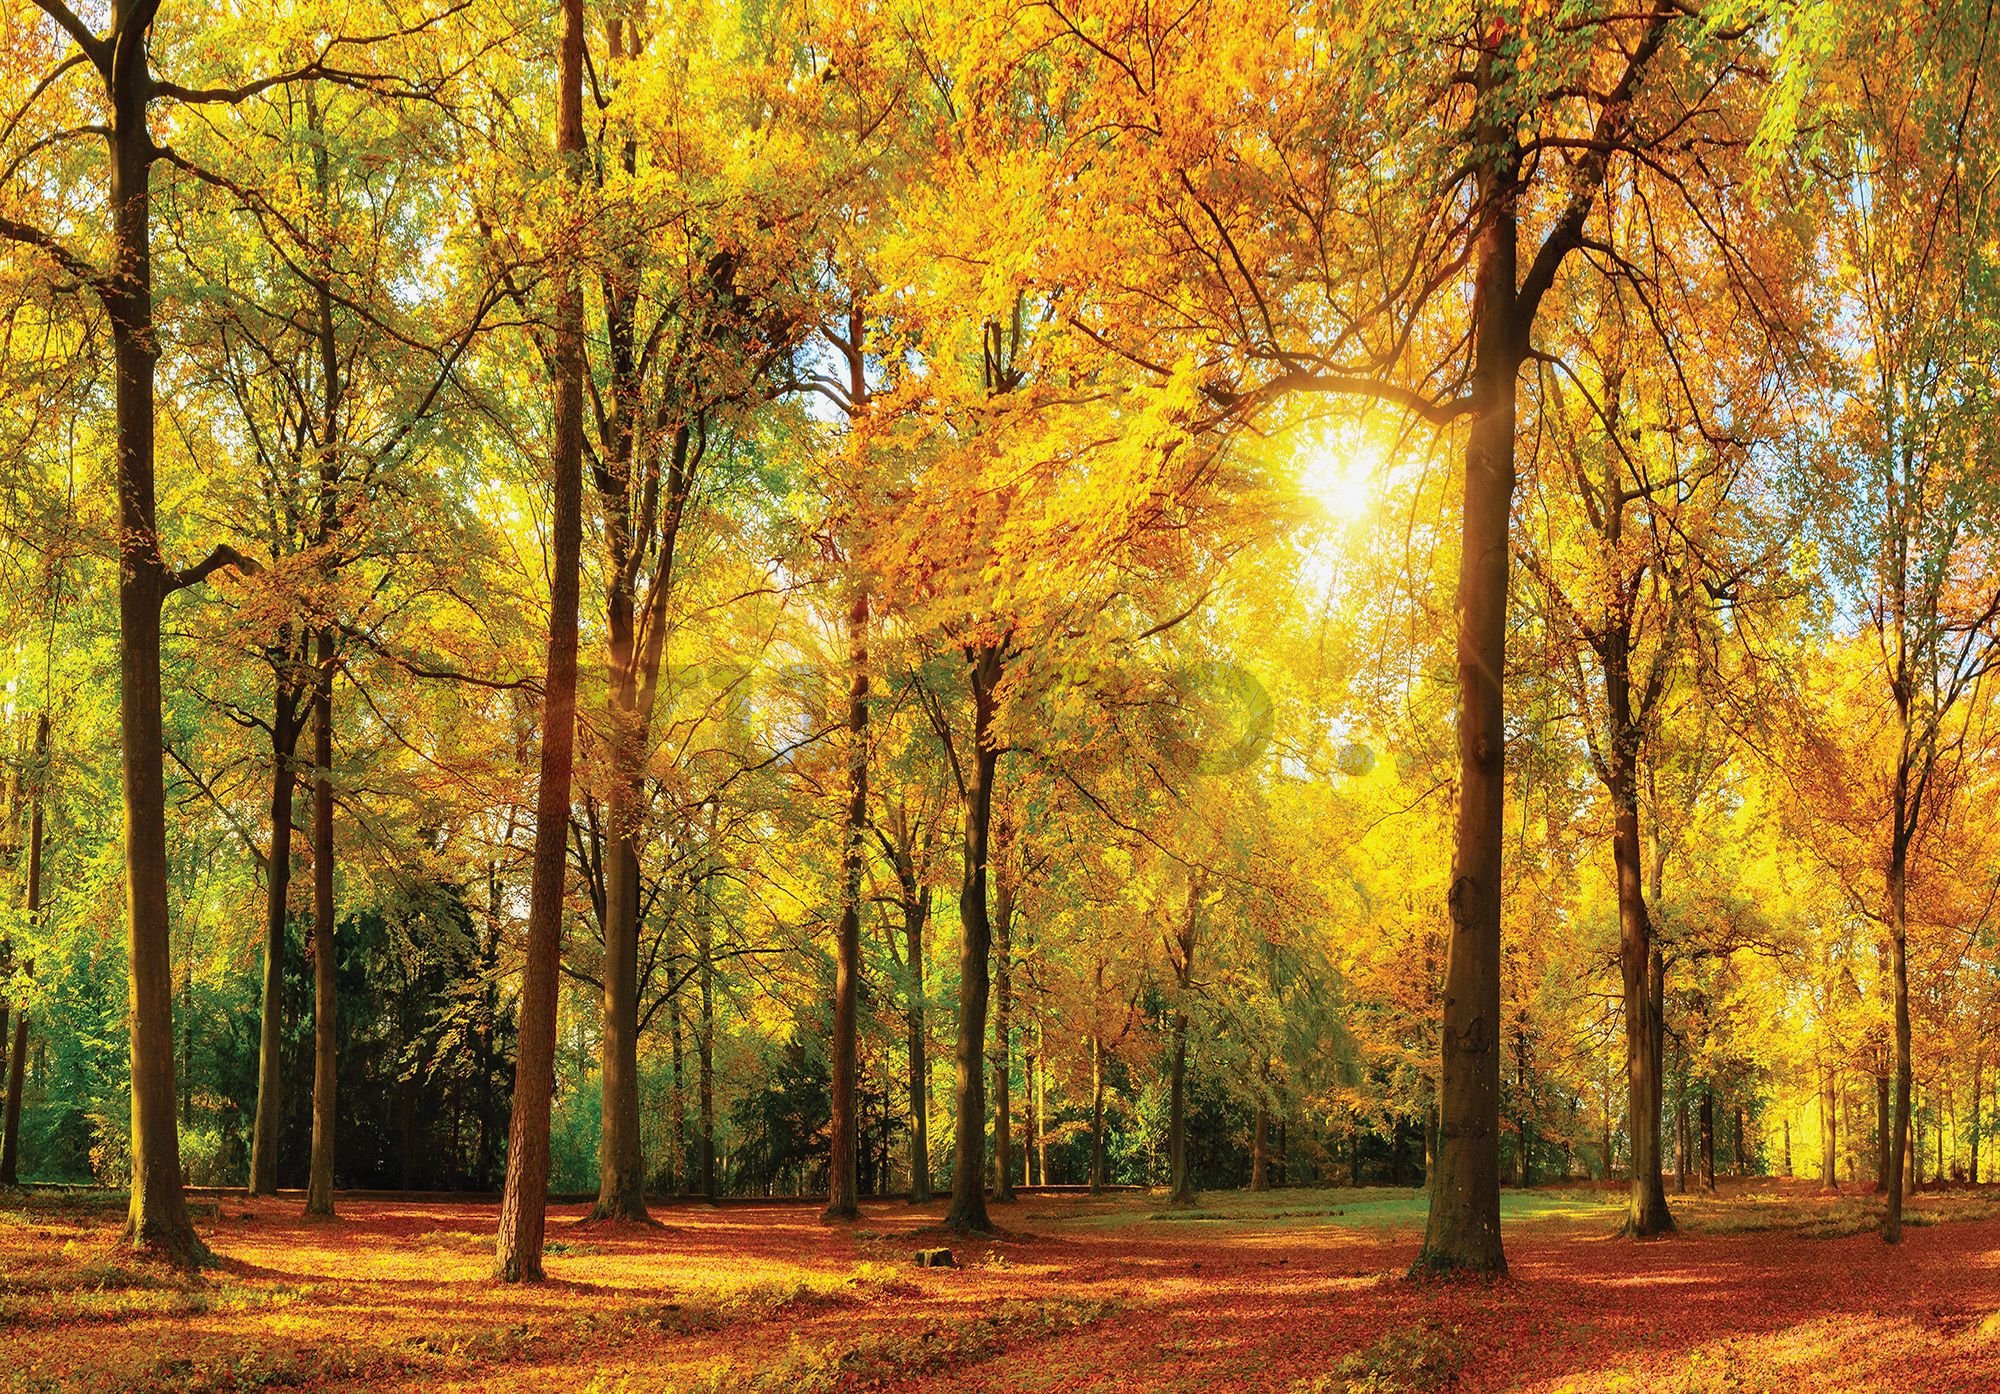 Wall mural vlies: Fallen leaves in the forest - 416x254 cm